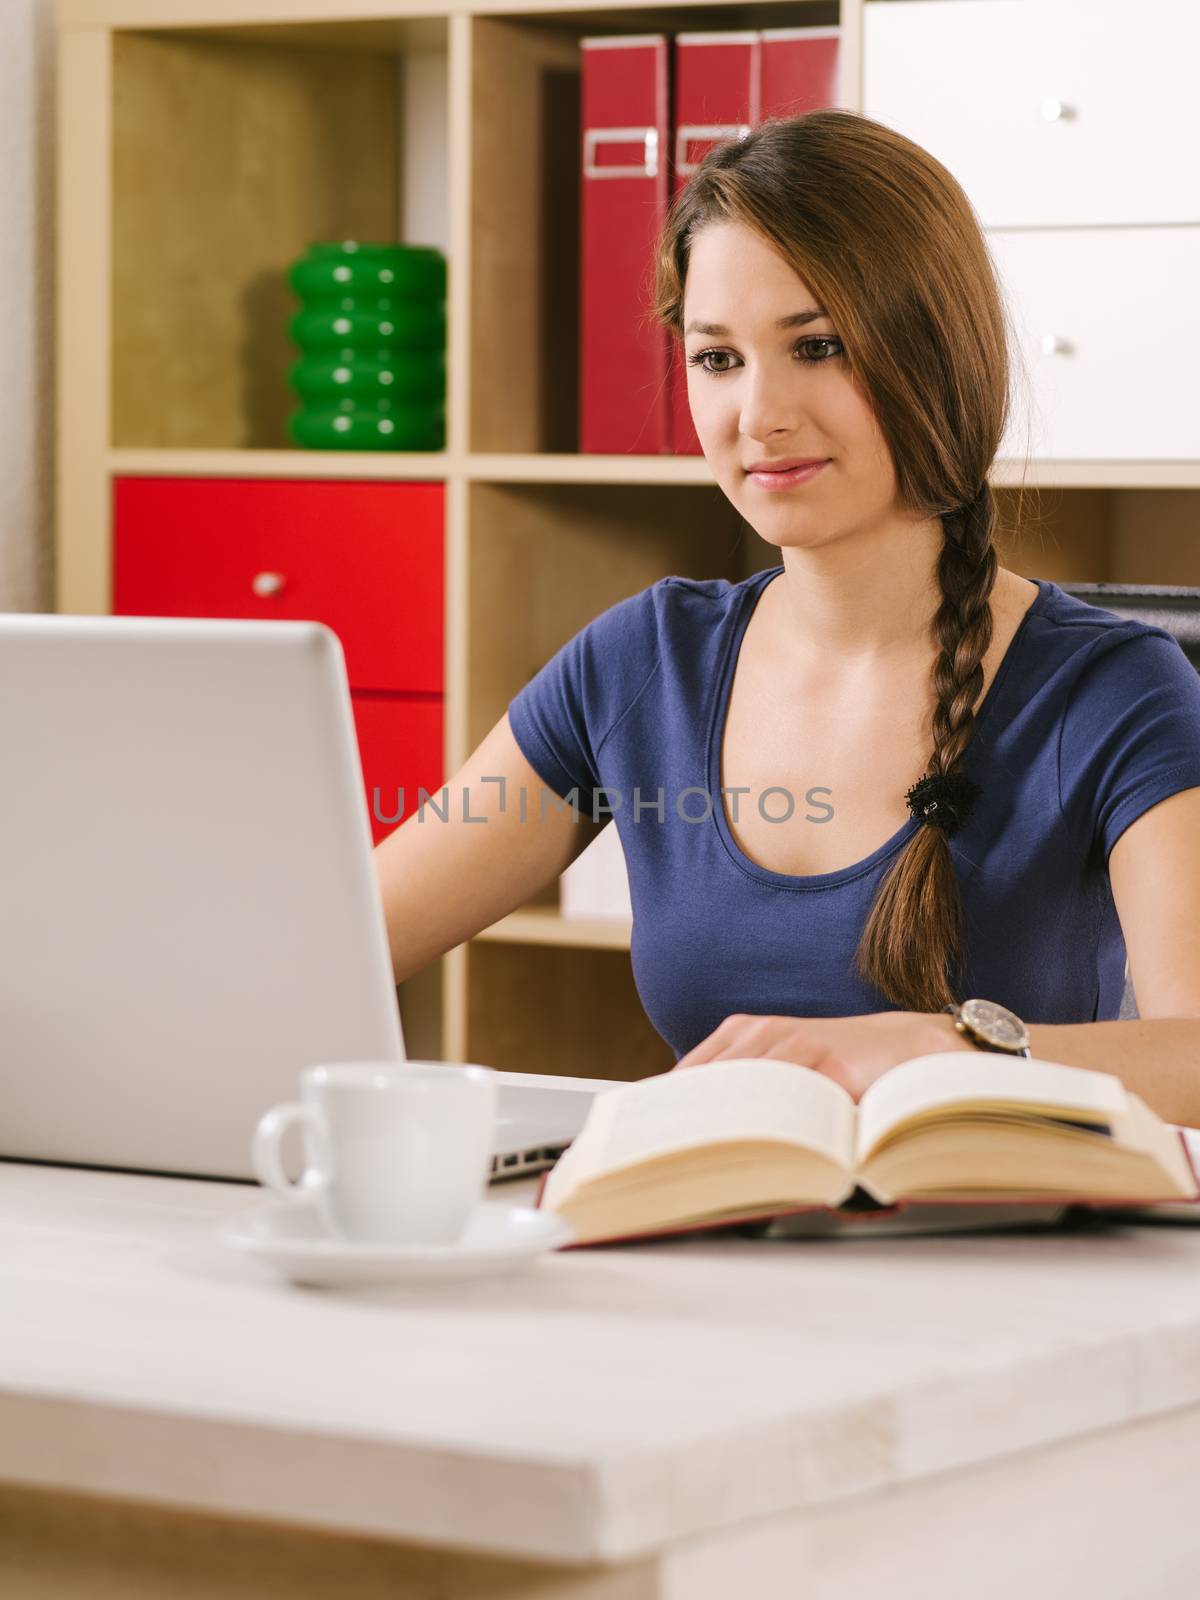 Photo of a beautiful woman using a laptop, drinking coffee, and reading a book.
